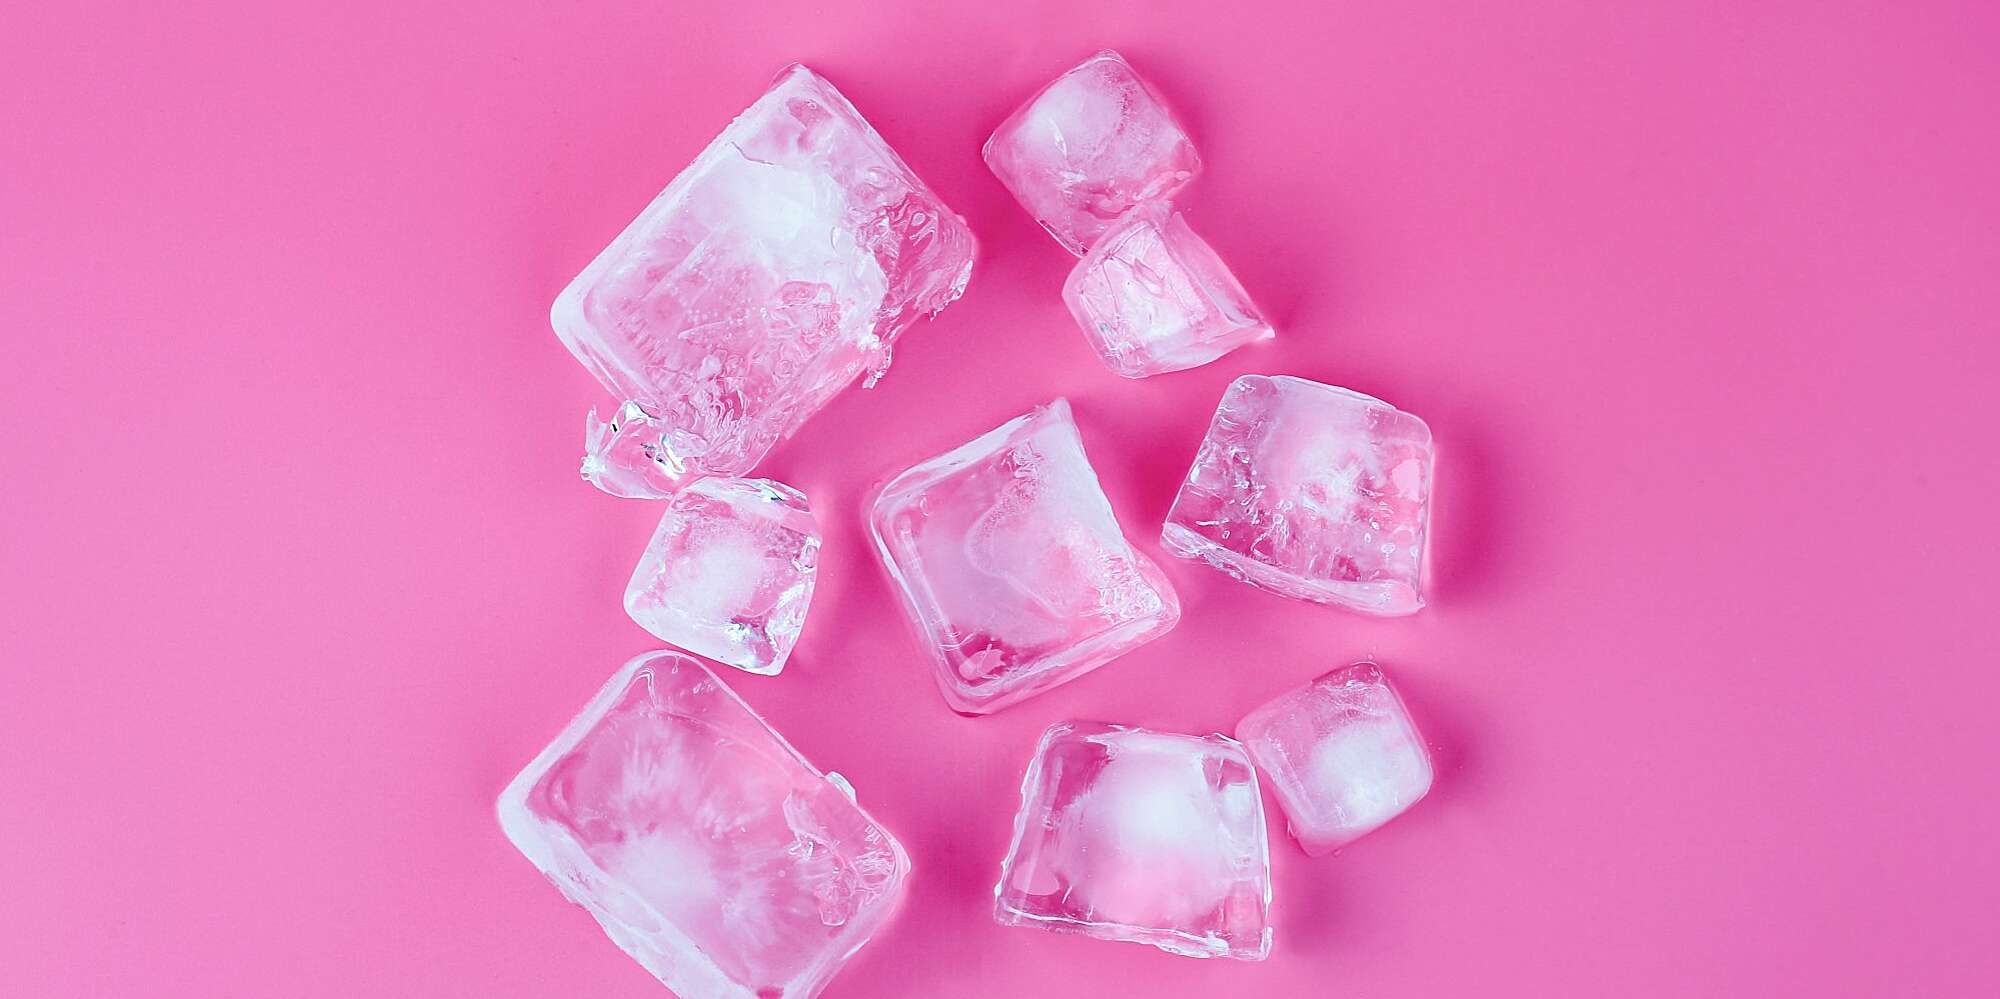 Is Eating Ice Bad For You? | MyRecipes